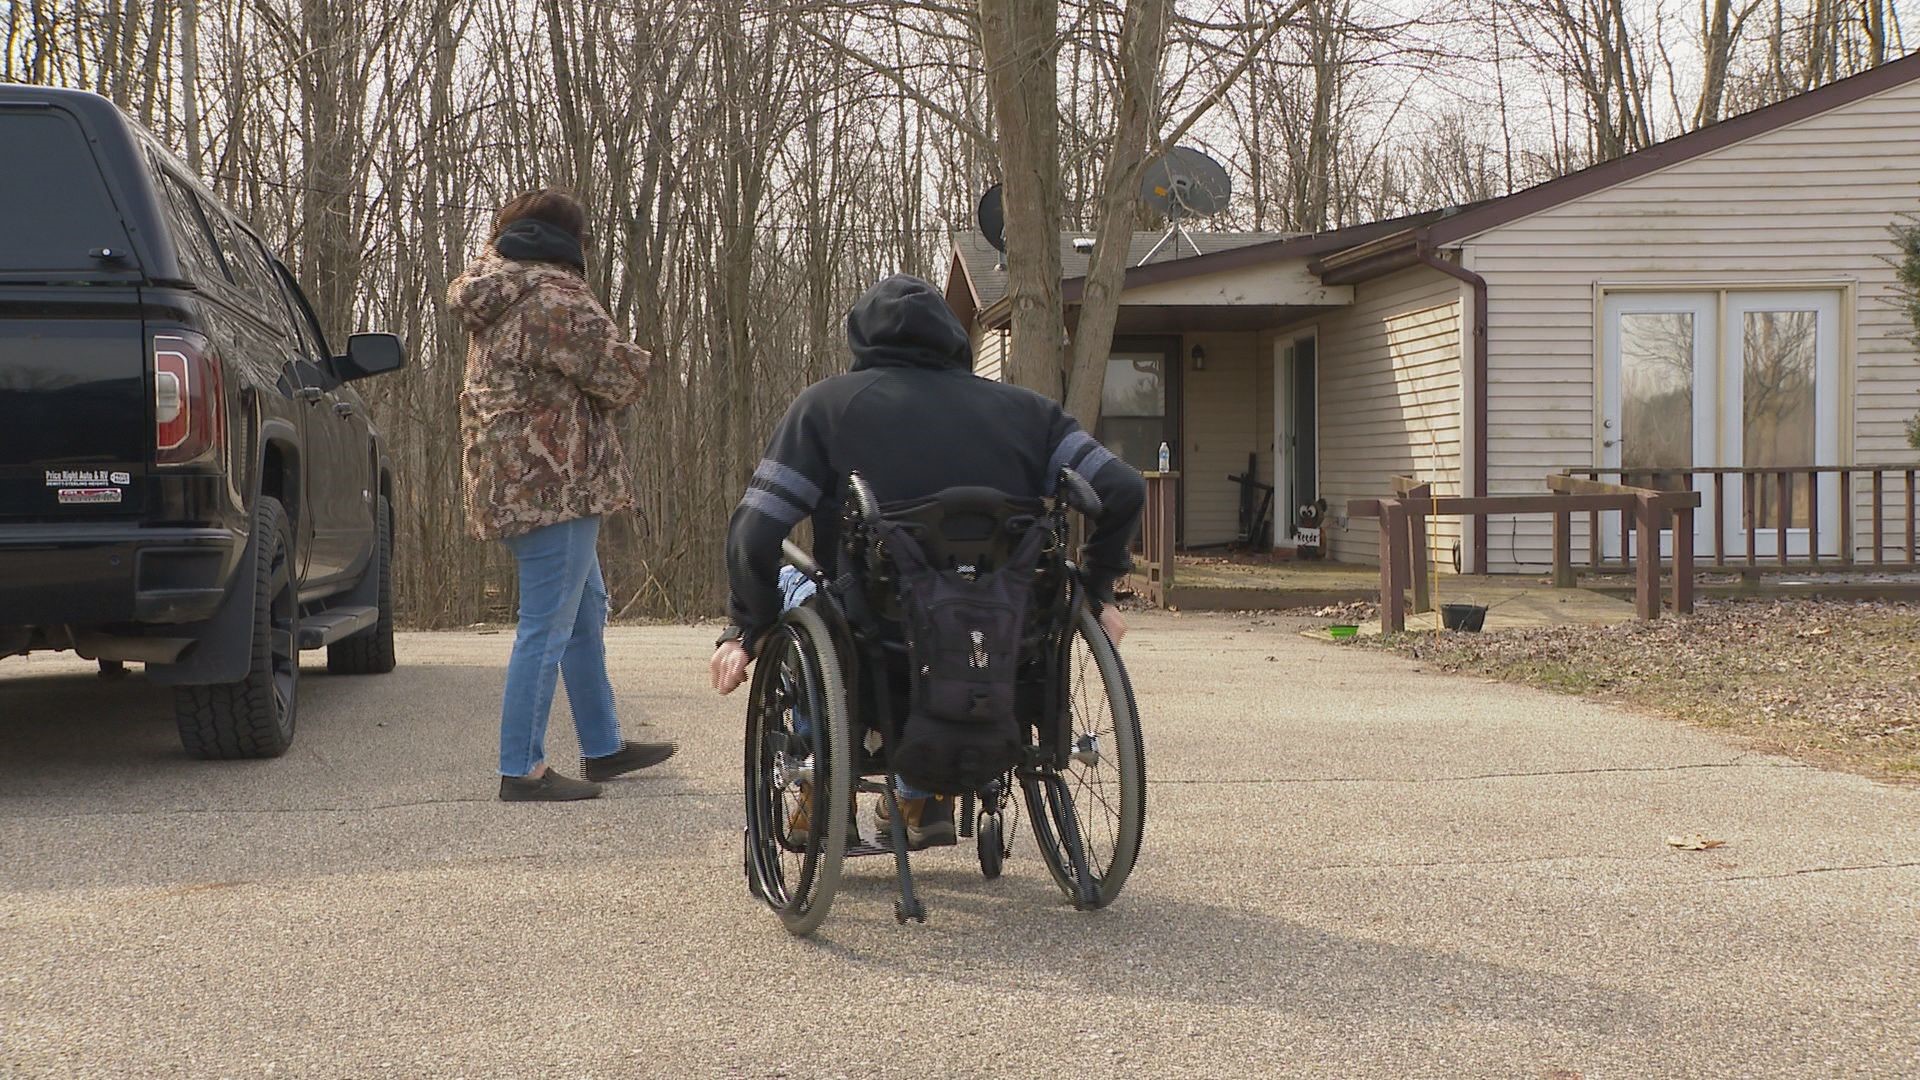 Estimates call for some $420-thousand in accessibility-minded upgrades before Joe Reed can live there.